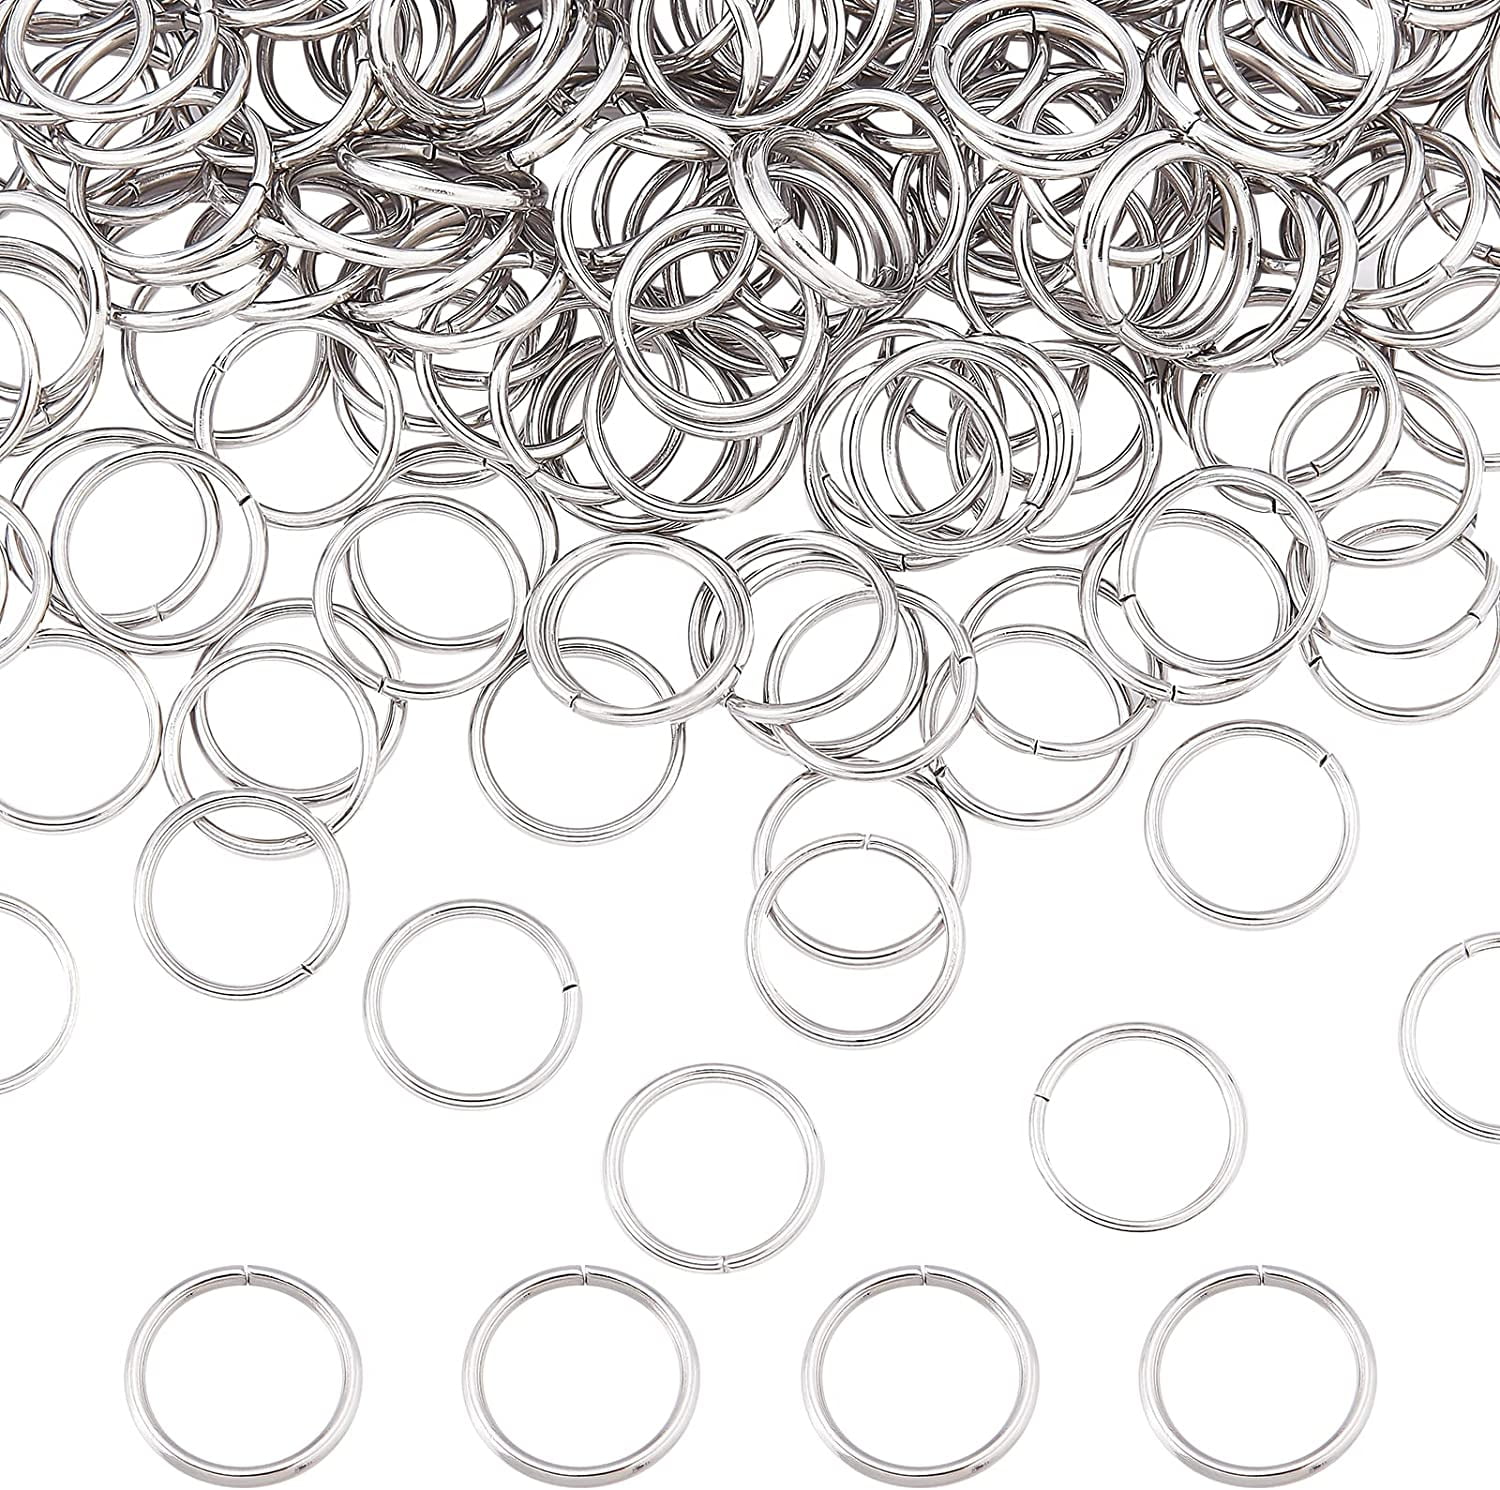 1030pcs Open Jump Rings 4-10mm Diameter Multi-Colored Jewelry Making DIY Necklace Connection Rings for Necklace, Women's, Size: Small